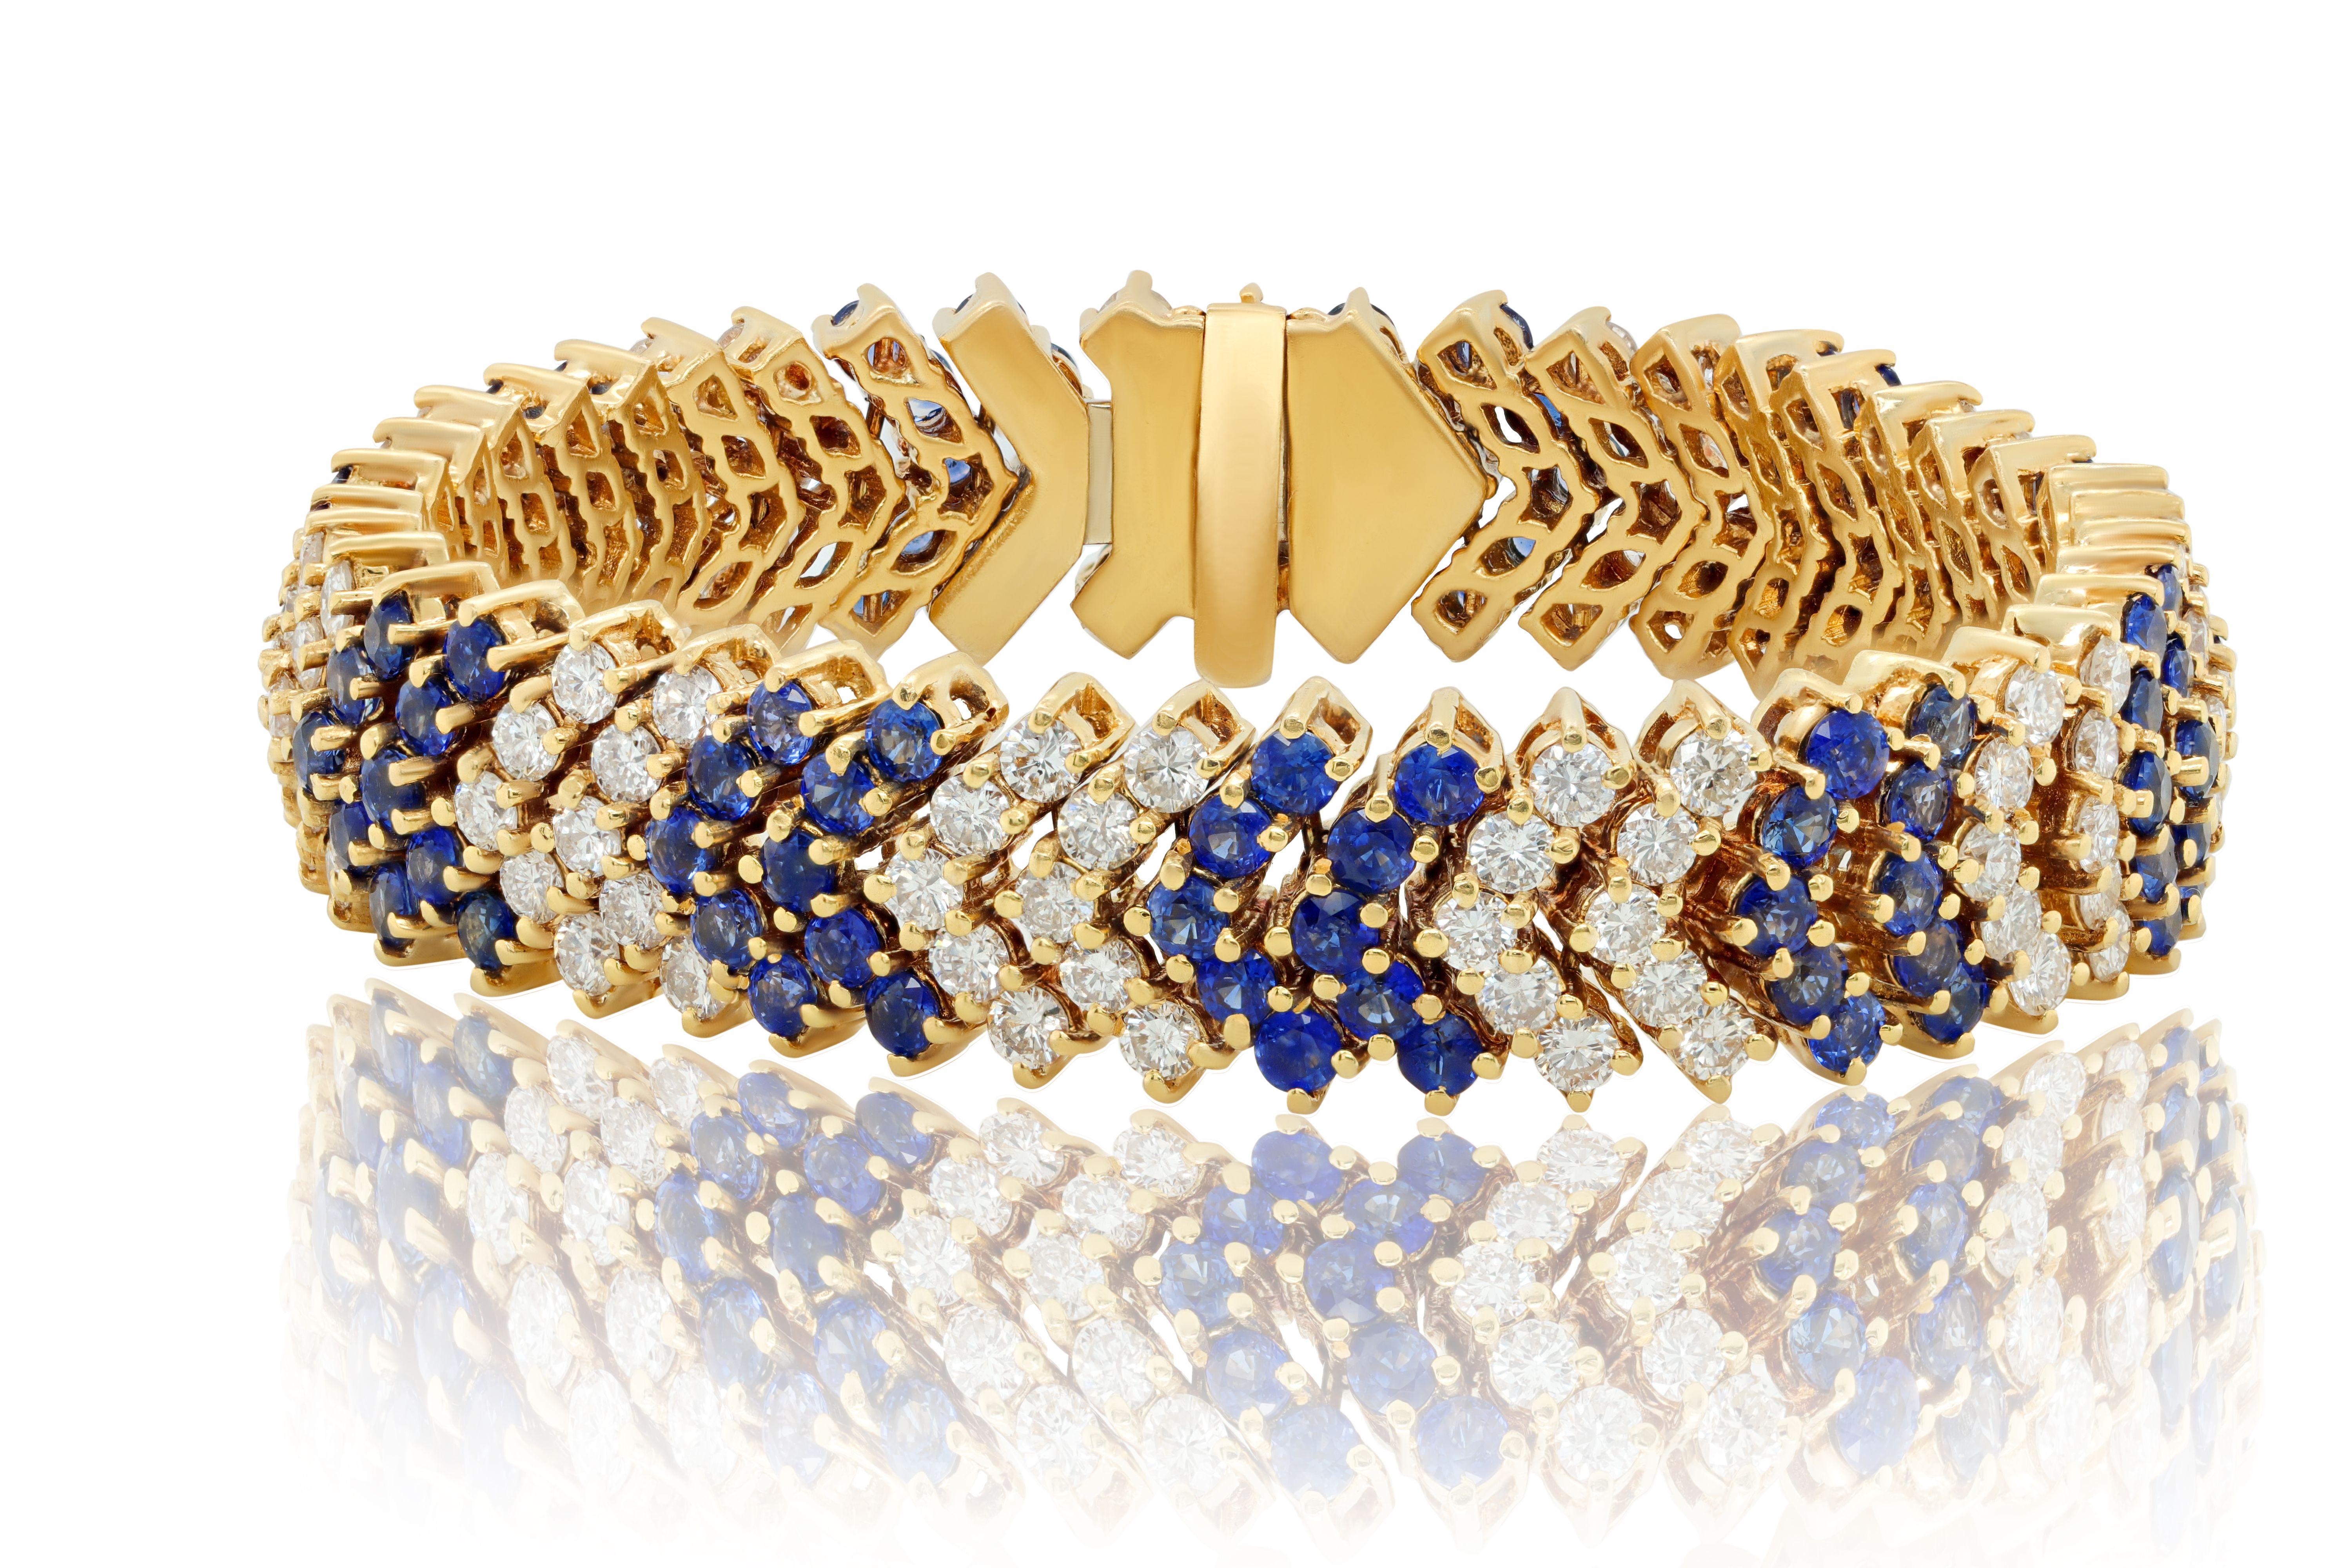 18 kt yellow gold diamond and sapphire bracelet with V-shaped pieces adorned with 14.39 cts tw of blue sapphires and 10.02 cts tw of white diamonds alternating between 2 sapphires and 2 diamonds 